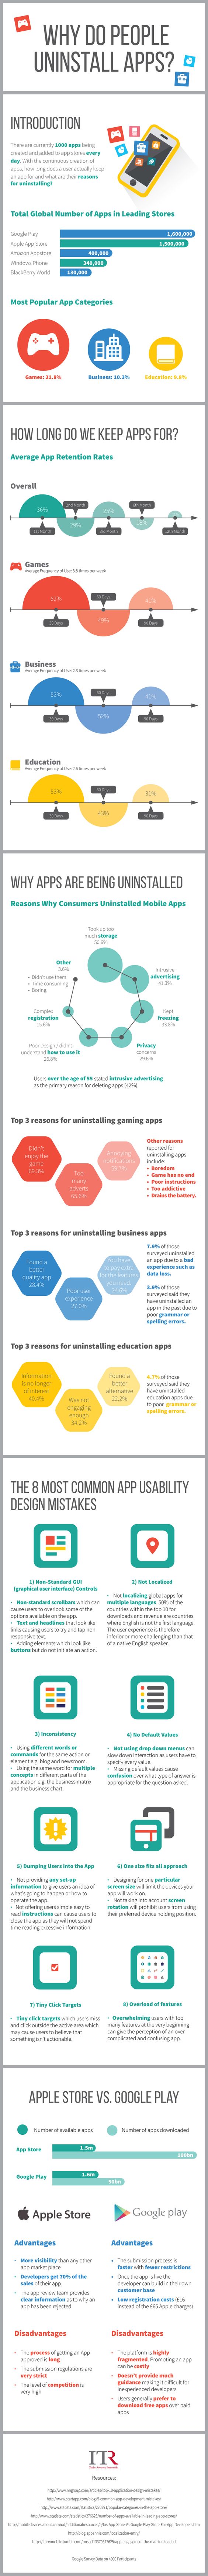 why users uninstall app infographic.jpg